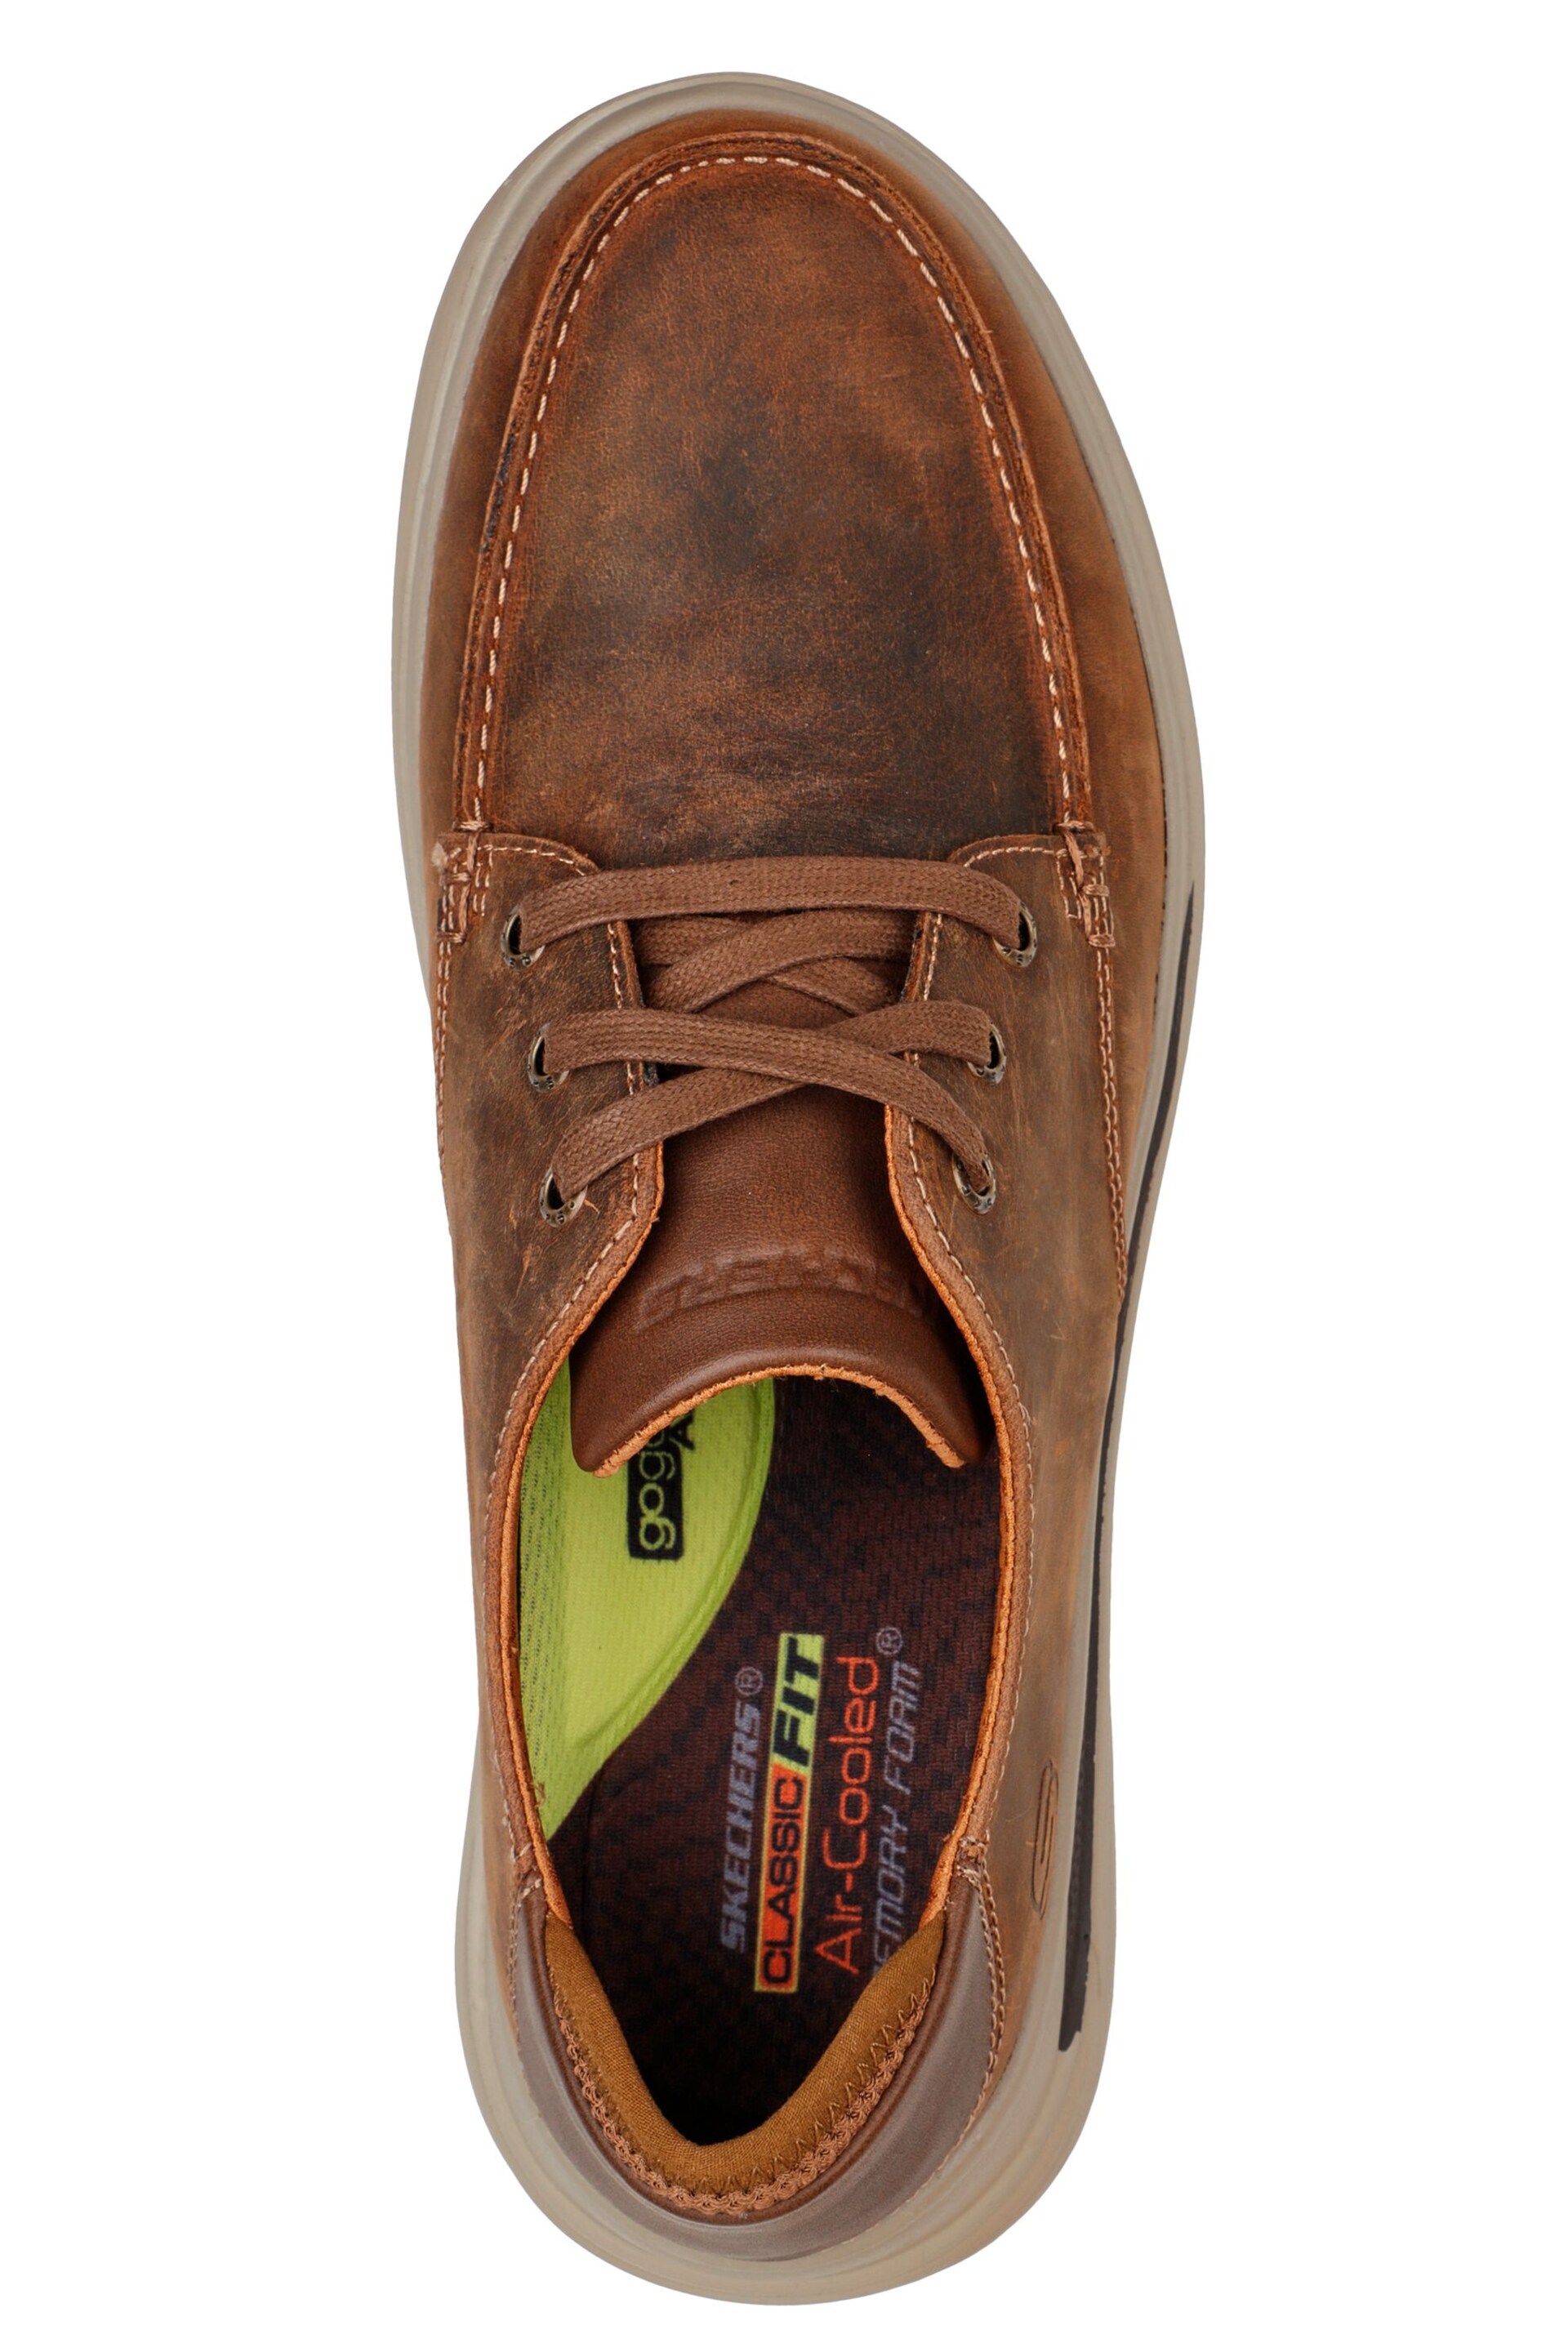 Skechers Brown Proven Valargo Mens Shoes - Image 4 of 5